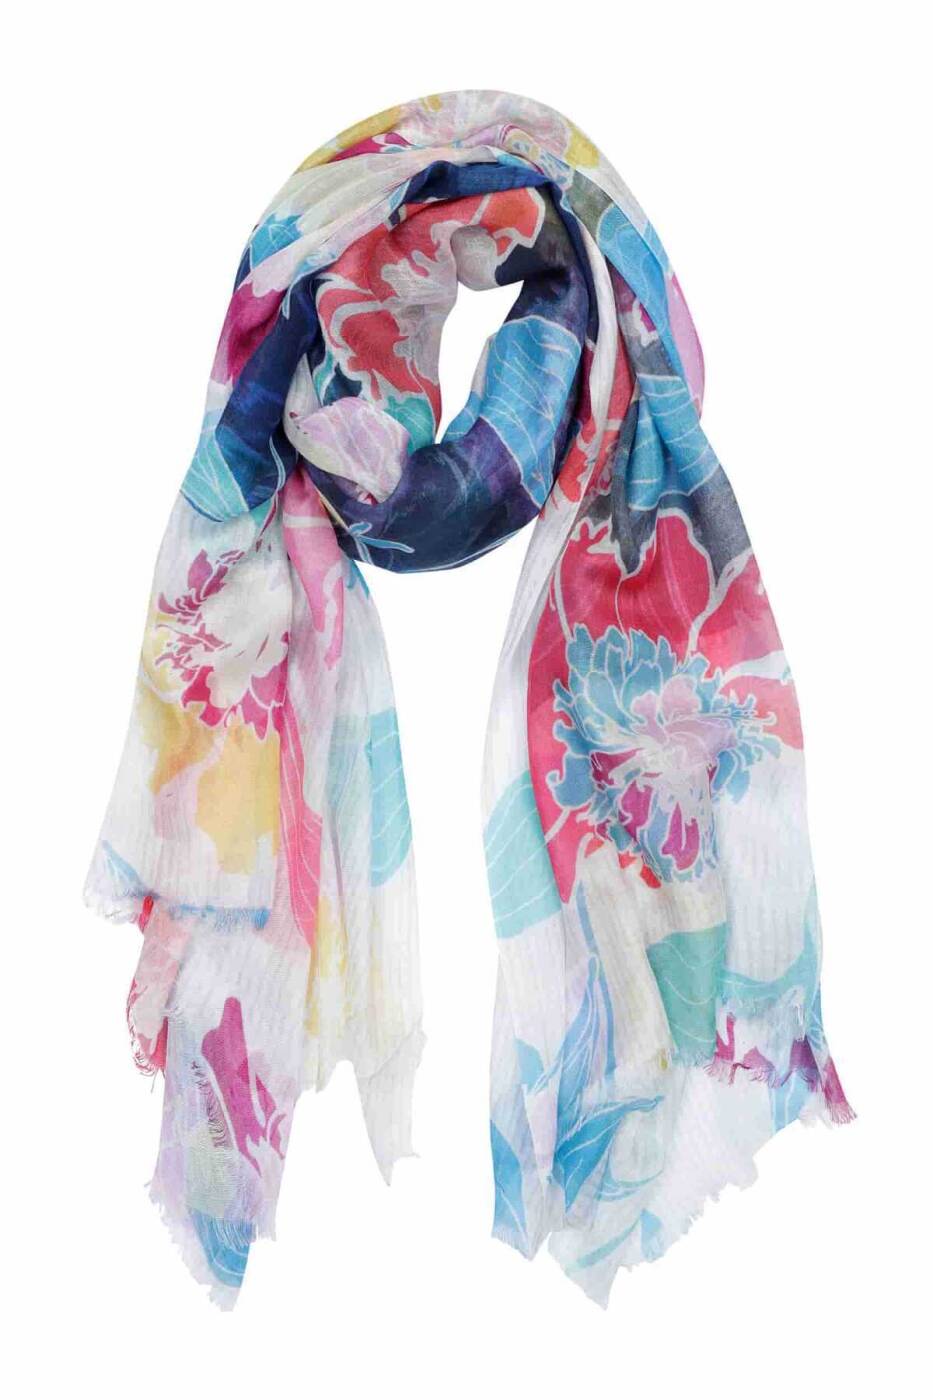 VACAY MODE MULTI-COLORED FLORAL PRINTED SCARF - Conscious Product